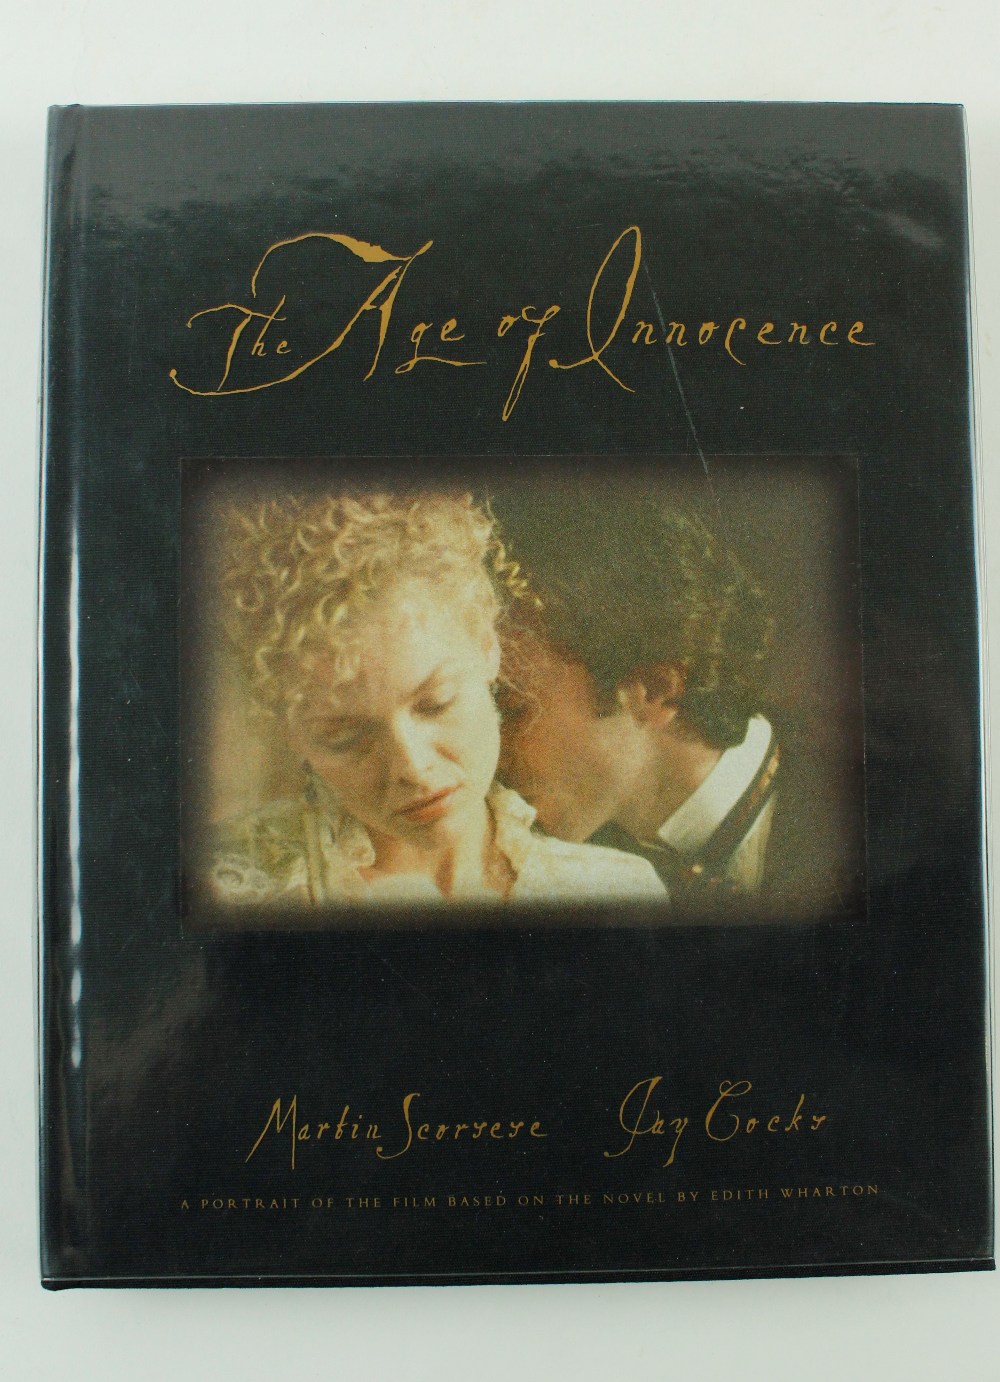 Signed by Martin ScorseseScorsese (Martin) & Cocks (J.) The Age of Innocence, A Portrait of the